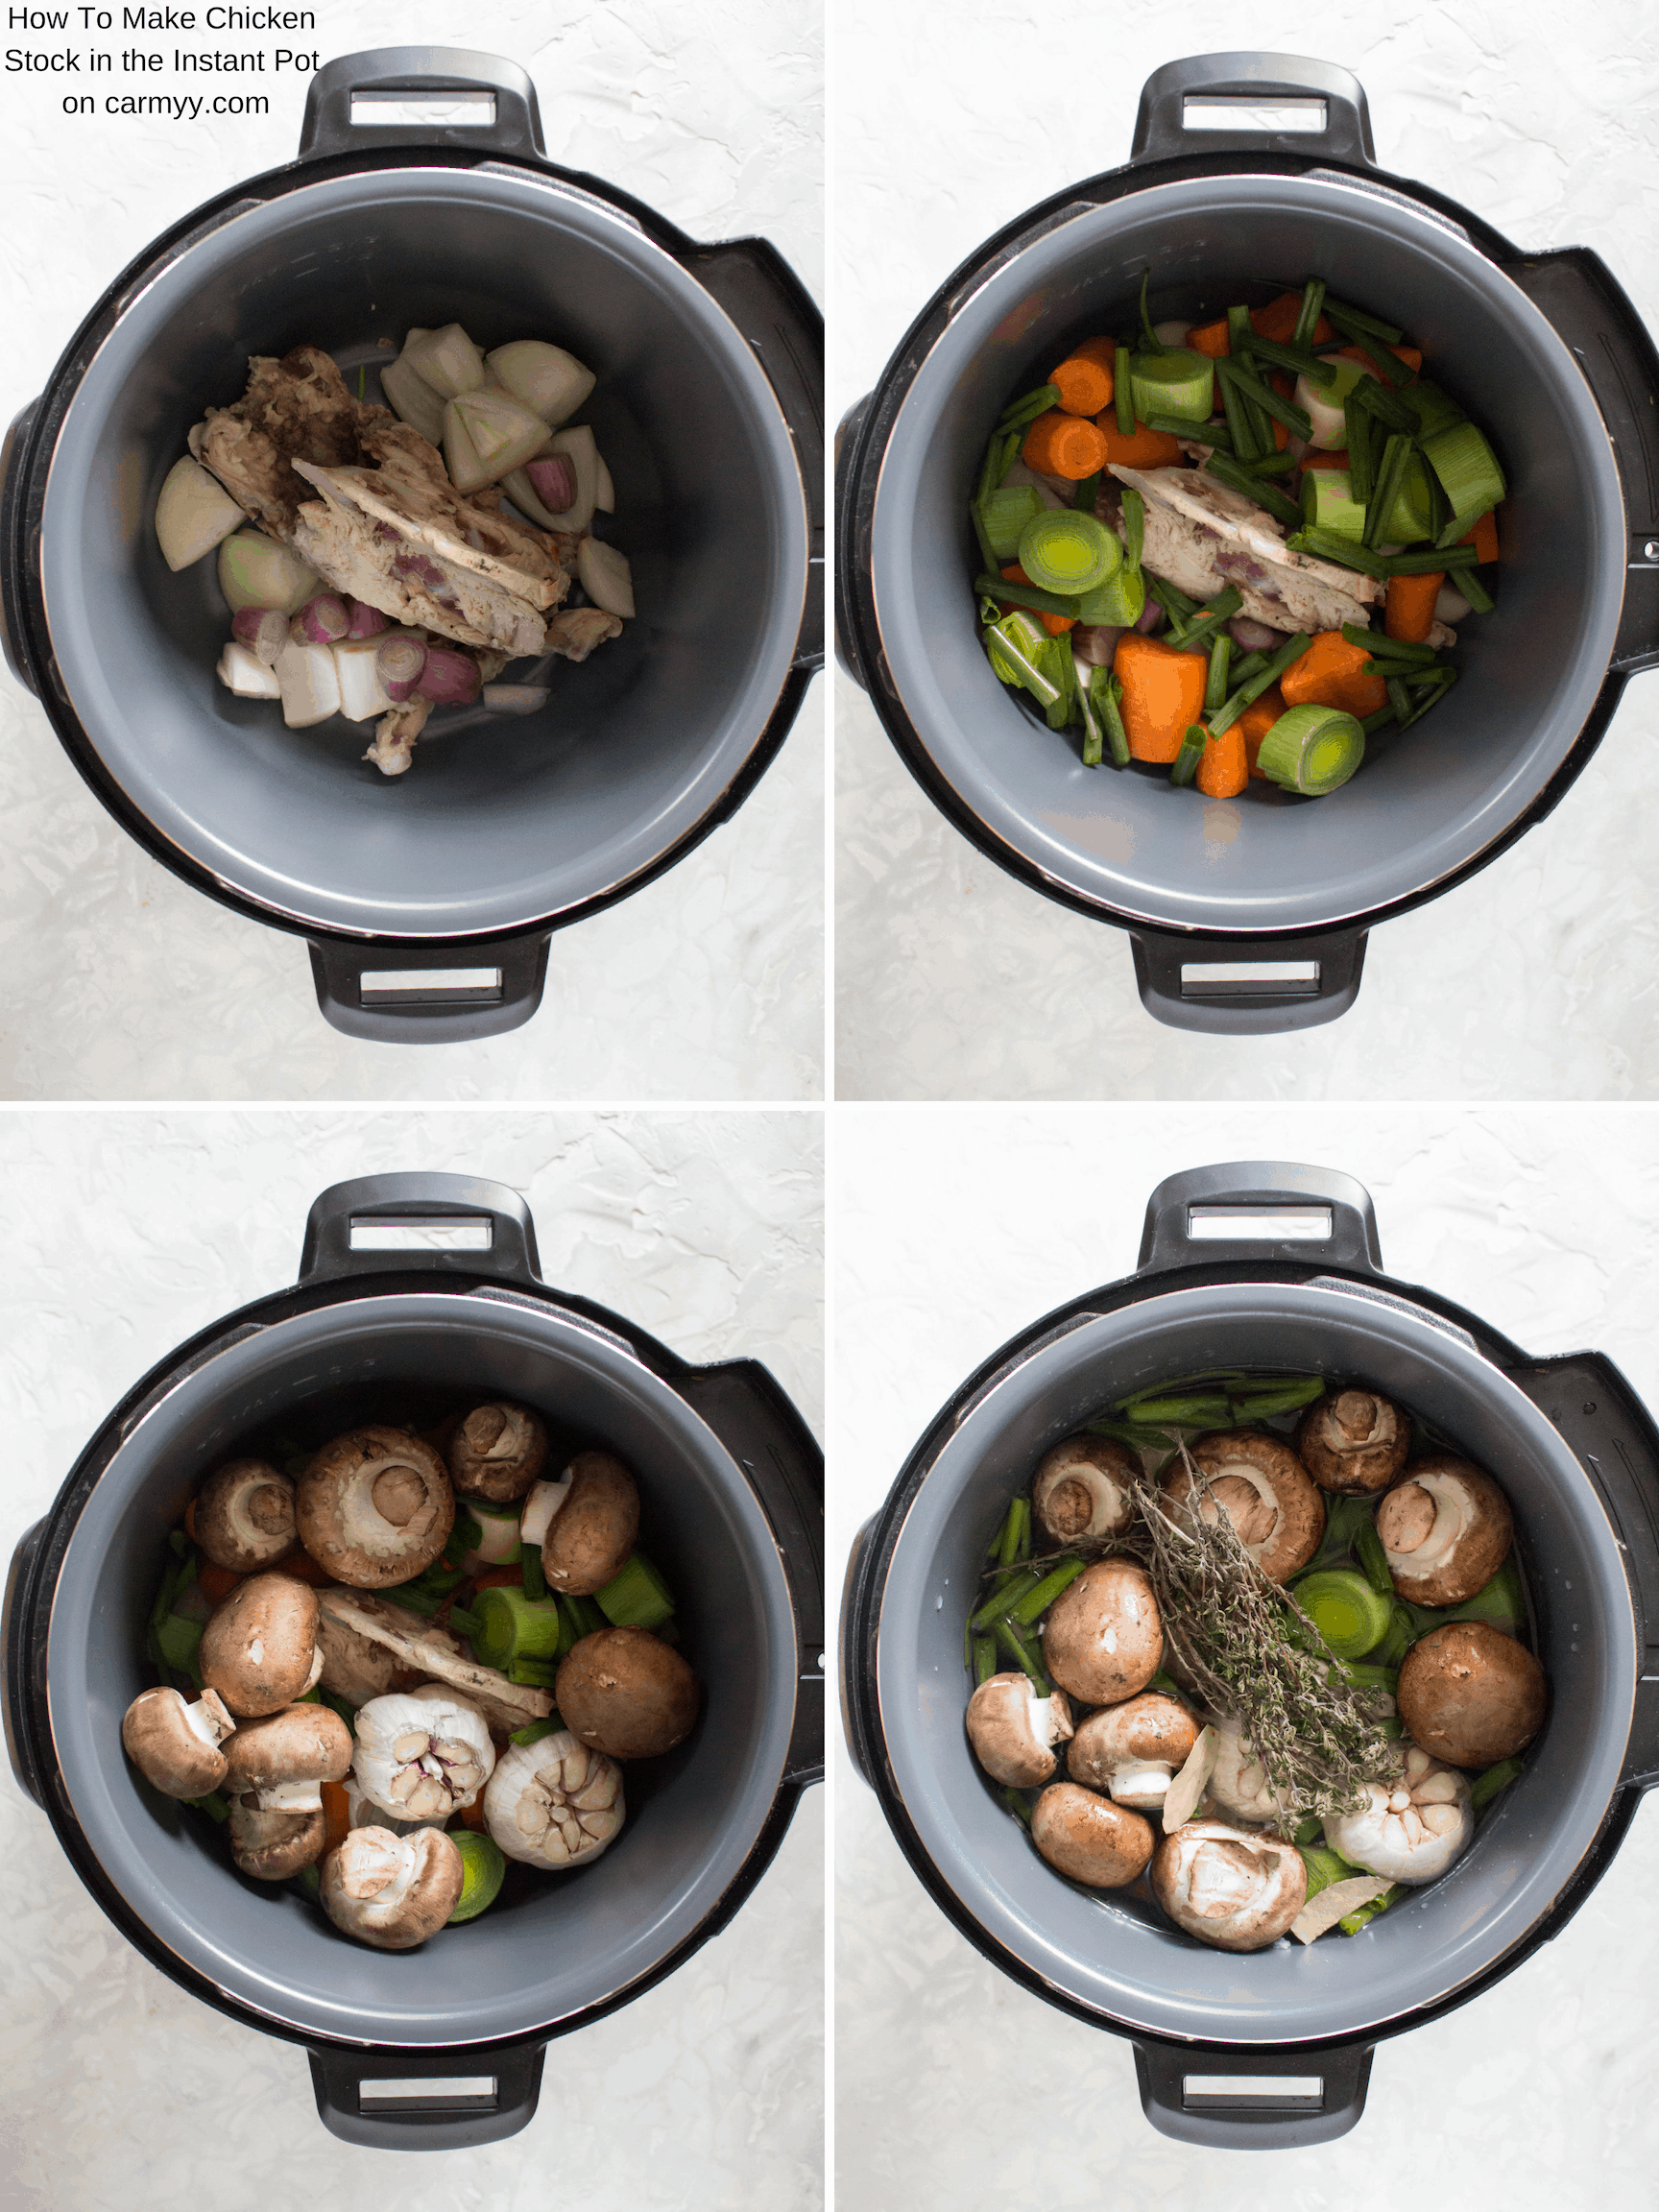 Step by step photo showing ingredients added to an Instant Pot to make chicken stock.